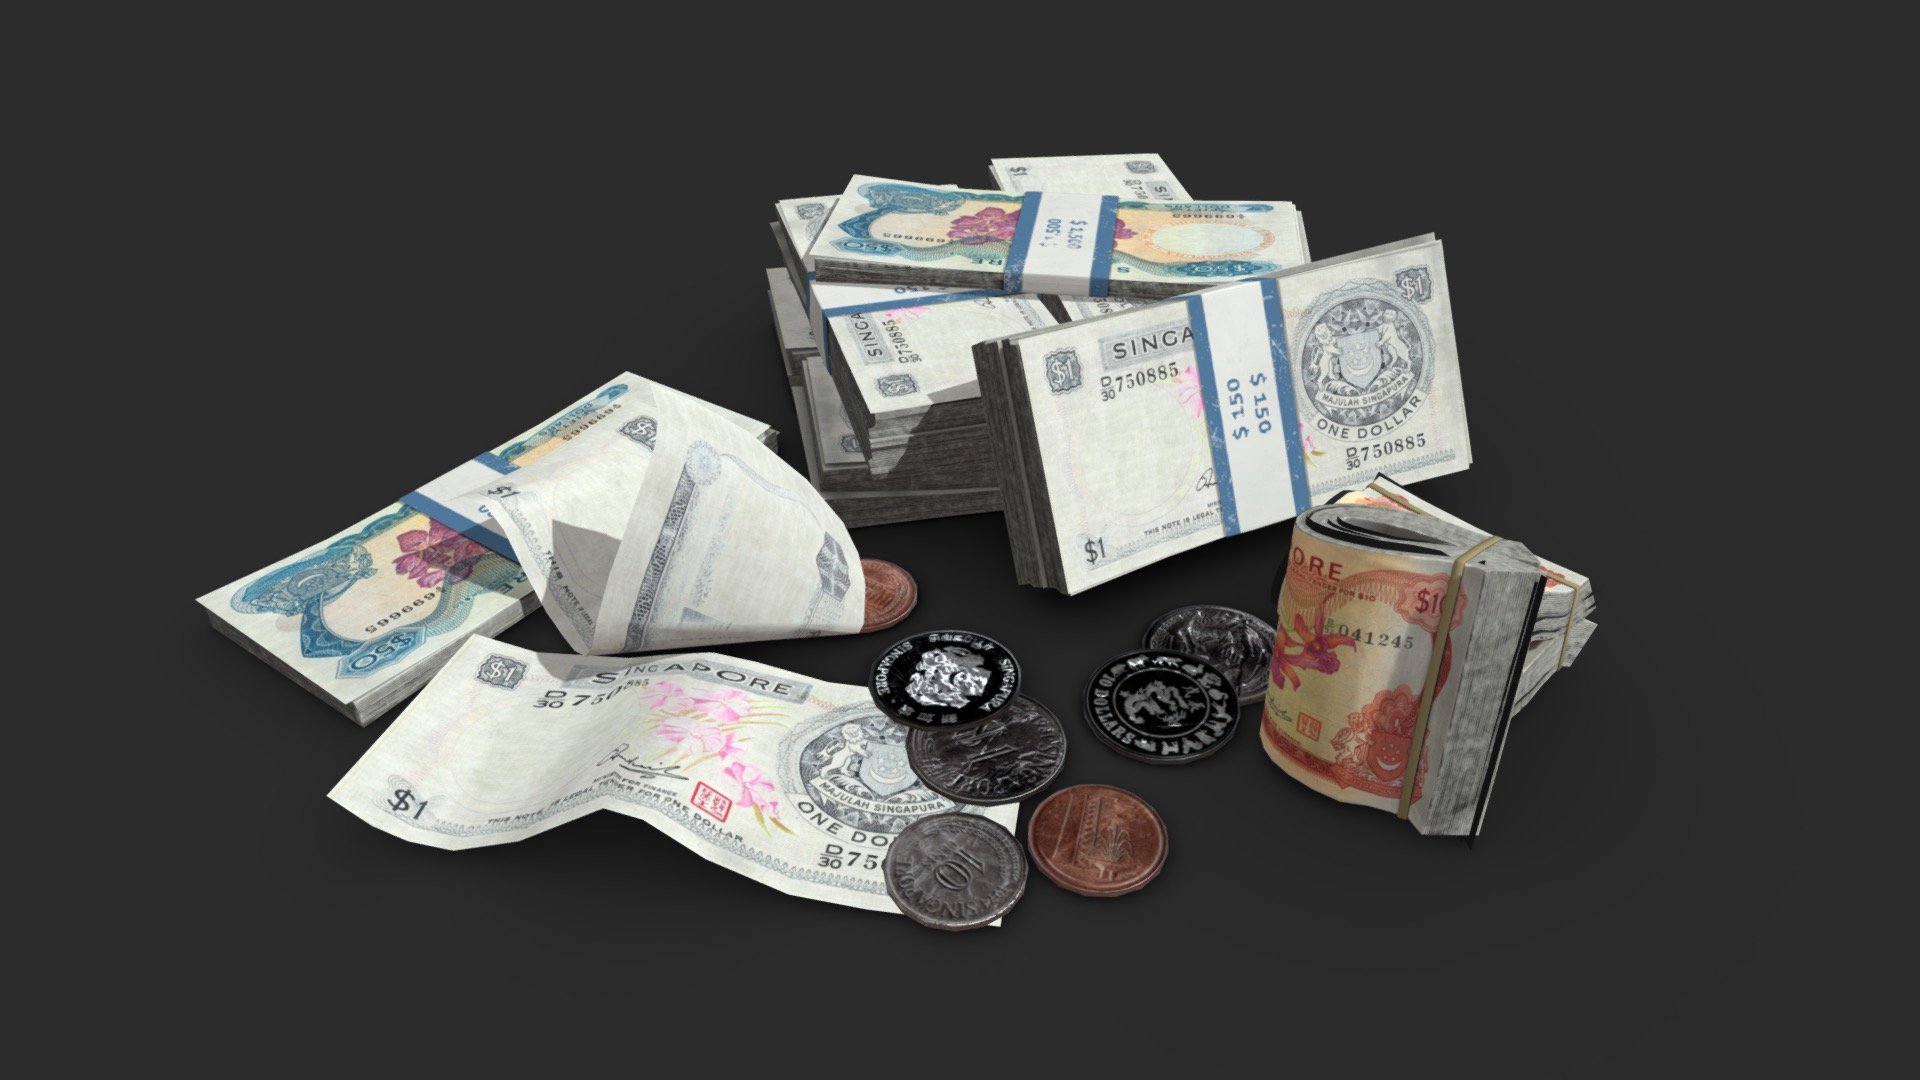 This old Singapore Dollars money loots including banknotes and coins includes 22 objects :


10 individuals banknotes (in 2 values)
4 different coins
3 banknote stacks

The assets can be used in any game (post-apocaliptic, first or third person, GTA like, survival… ). All objects share a unique material for the best optimization for games.

Those AAA game assets pack of money loots will embellish your scene and add more details which can help the gameplay, the game design or the level design.

All textures are PBR ready and available in 4K.

Low-poly model &amp; Blender native 3.1

SPECIFICATIONS


Objects : 22
Polygons : 4541

GAME SPECS


LODs : Yes (inside FBX for Unity &amp; Unreal)
Numbers of LODs : 2
Collider : No

EXPORTED FORMATS


FBX
Collada
OBJ

TEXTURES


Materials in scene : 1
Textures sizes : 4K
Textures types : Base Color, Metallic, Roughness, Normal (DirectX &amp; OpenGL), Heigh &amp; AO (also Unity &amp; Unreal ARM workflow maps)
Textures format : PNG
 - Money Loot - Singapore Dollars - Buy Royalty Free 3D model by KangaroOz 3D (@KangaroOz-3D) 3d model